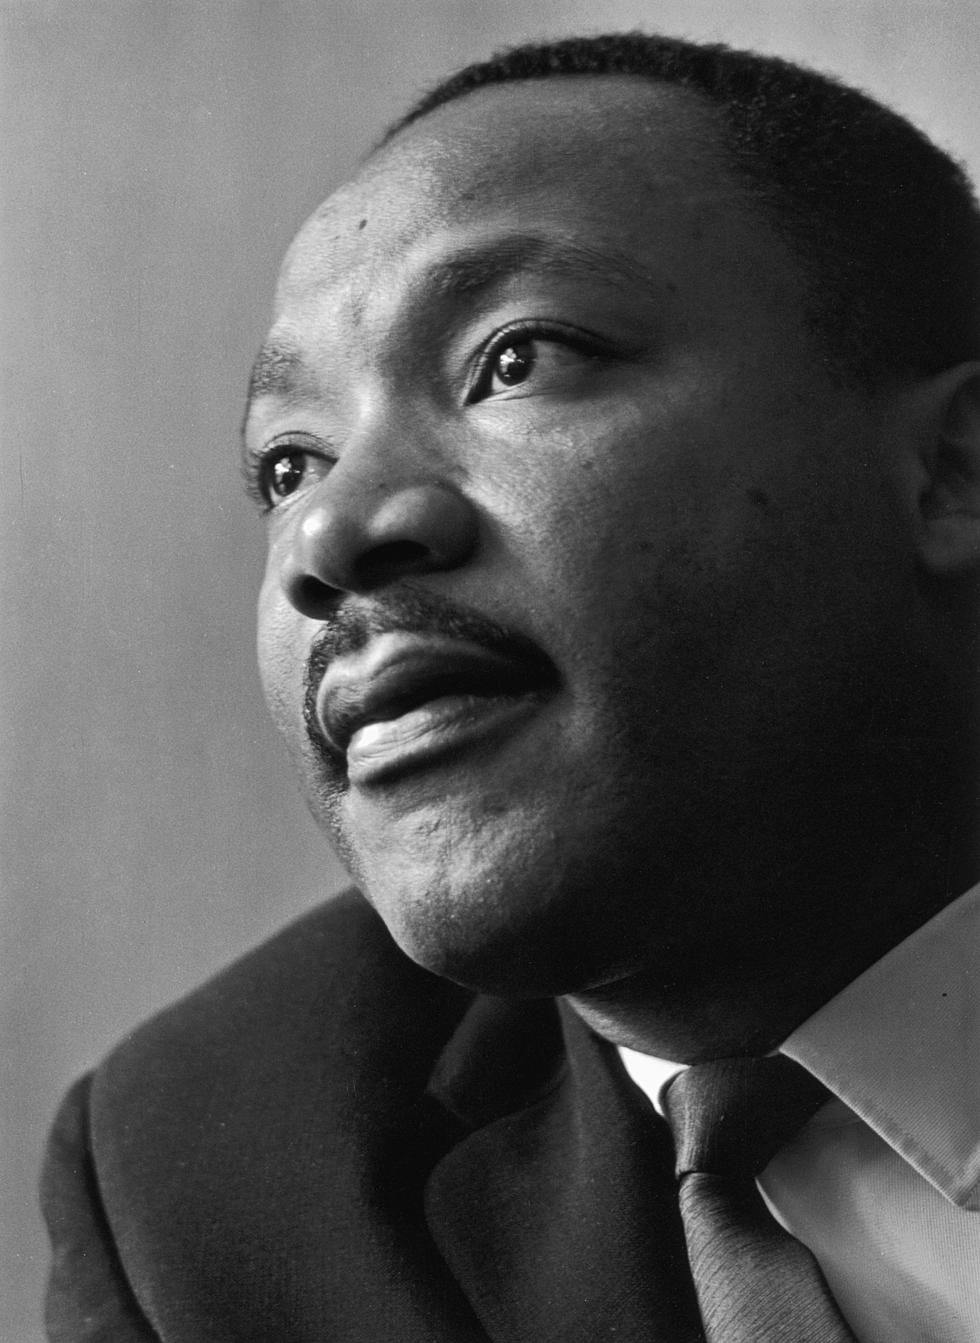 Martin Luther King Jr. Day: National Day Of Service In Grand Rapids